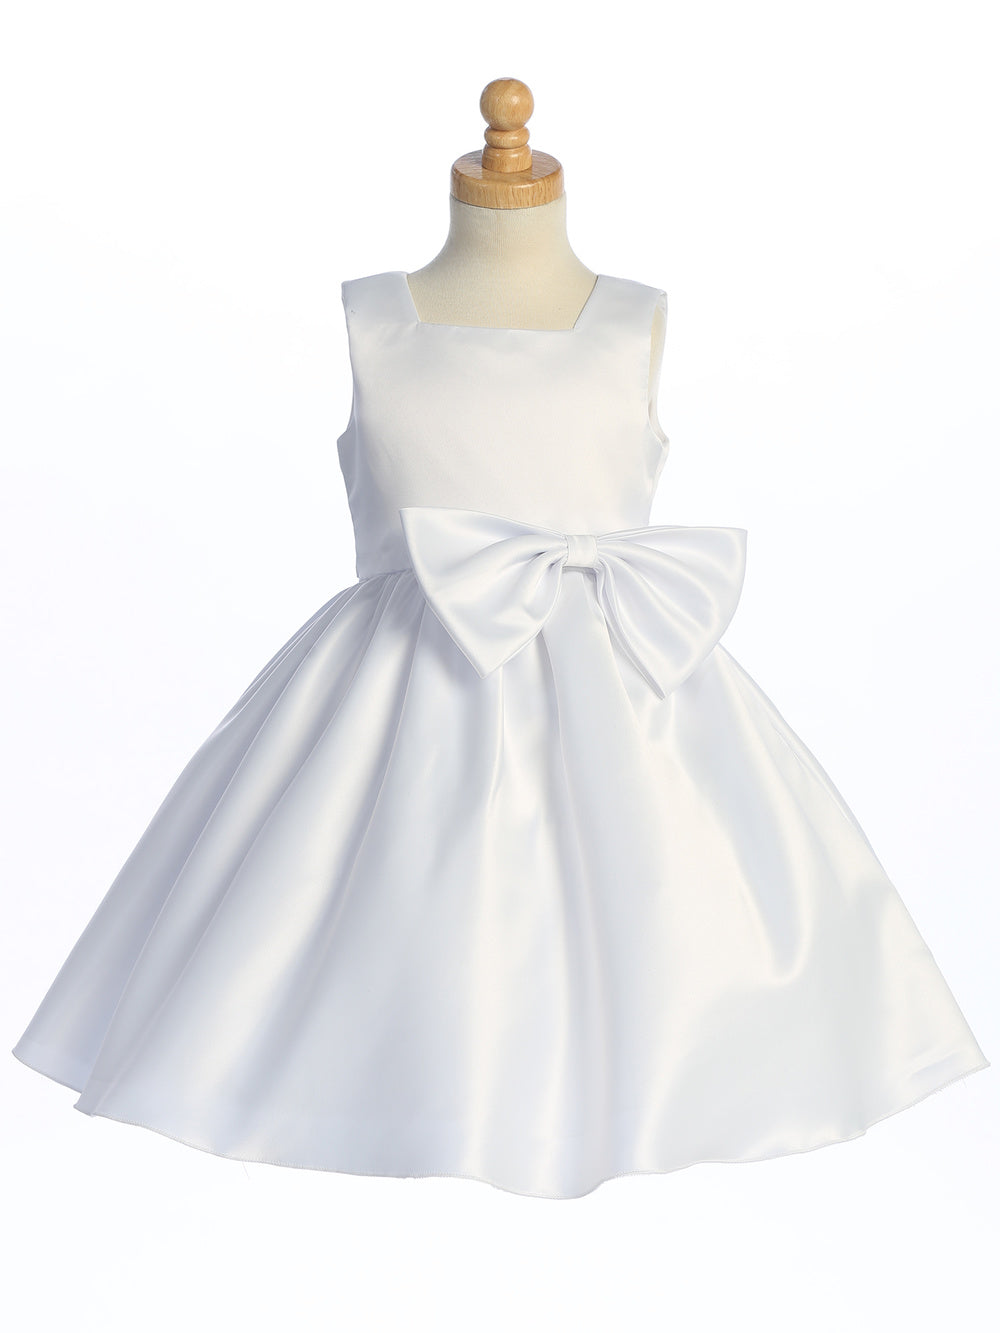 Flower girl mesmerizes in a U.S.A. made satin dress, the epitome of grace.